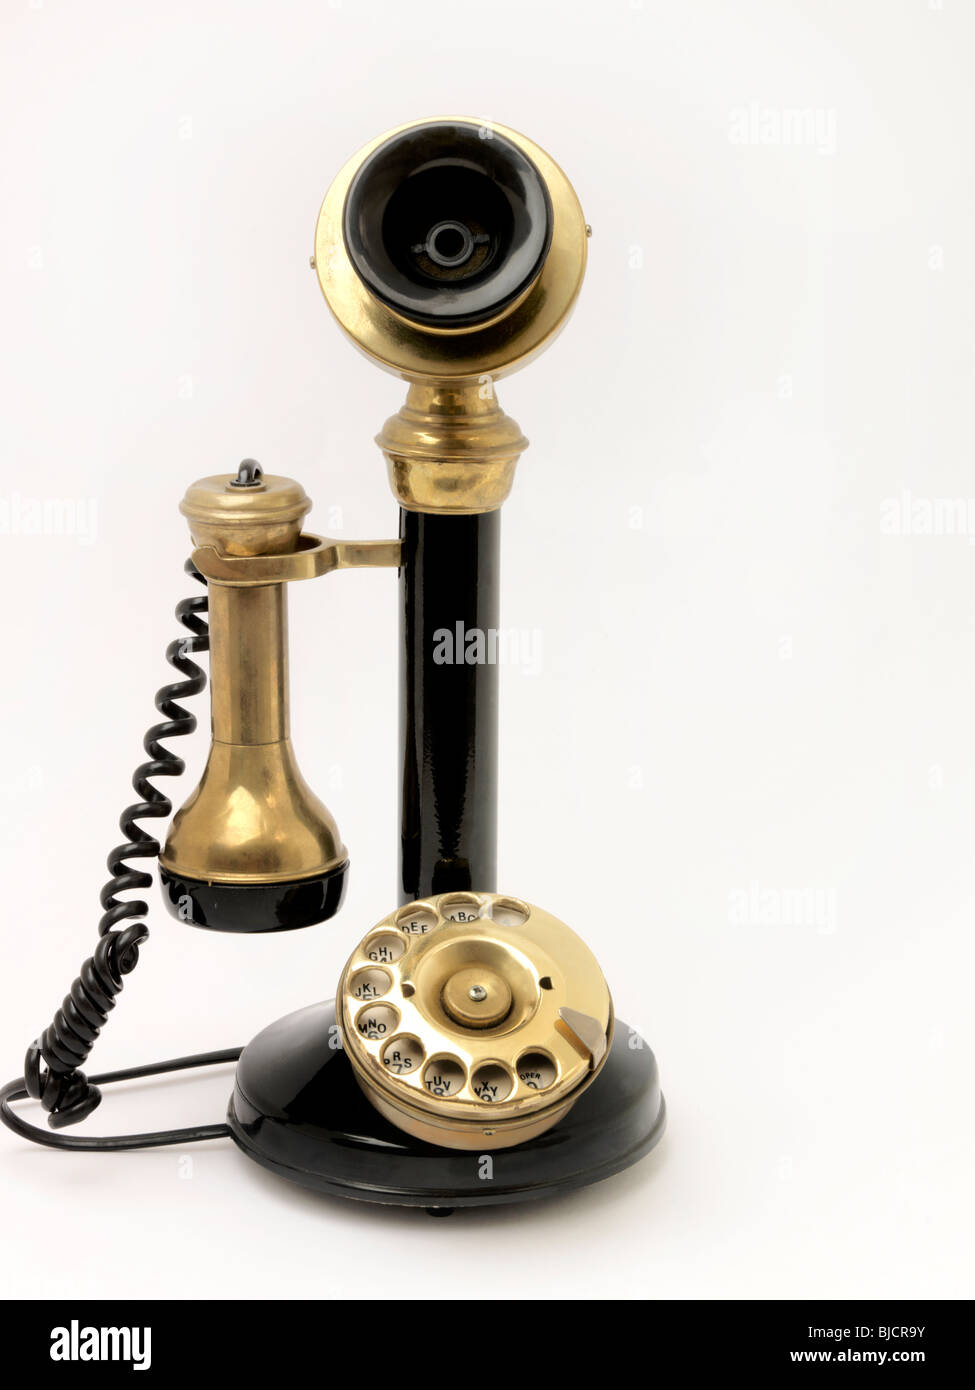 Antique Candlestick Rotary Dial Telephone Stock Photo